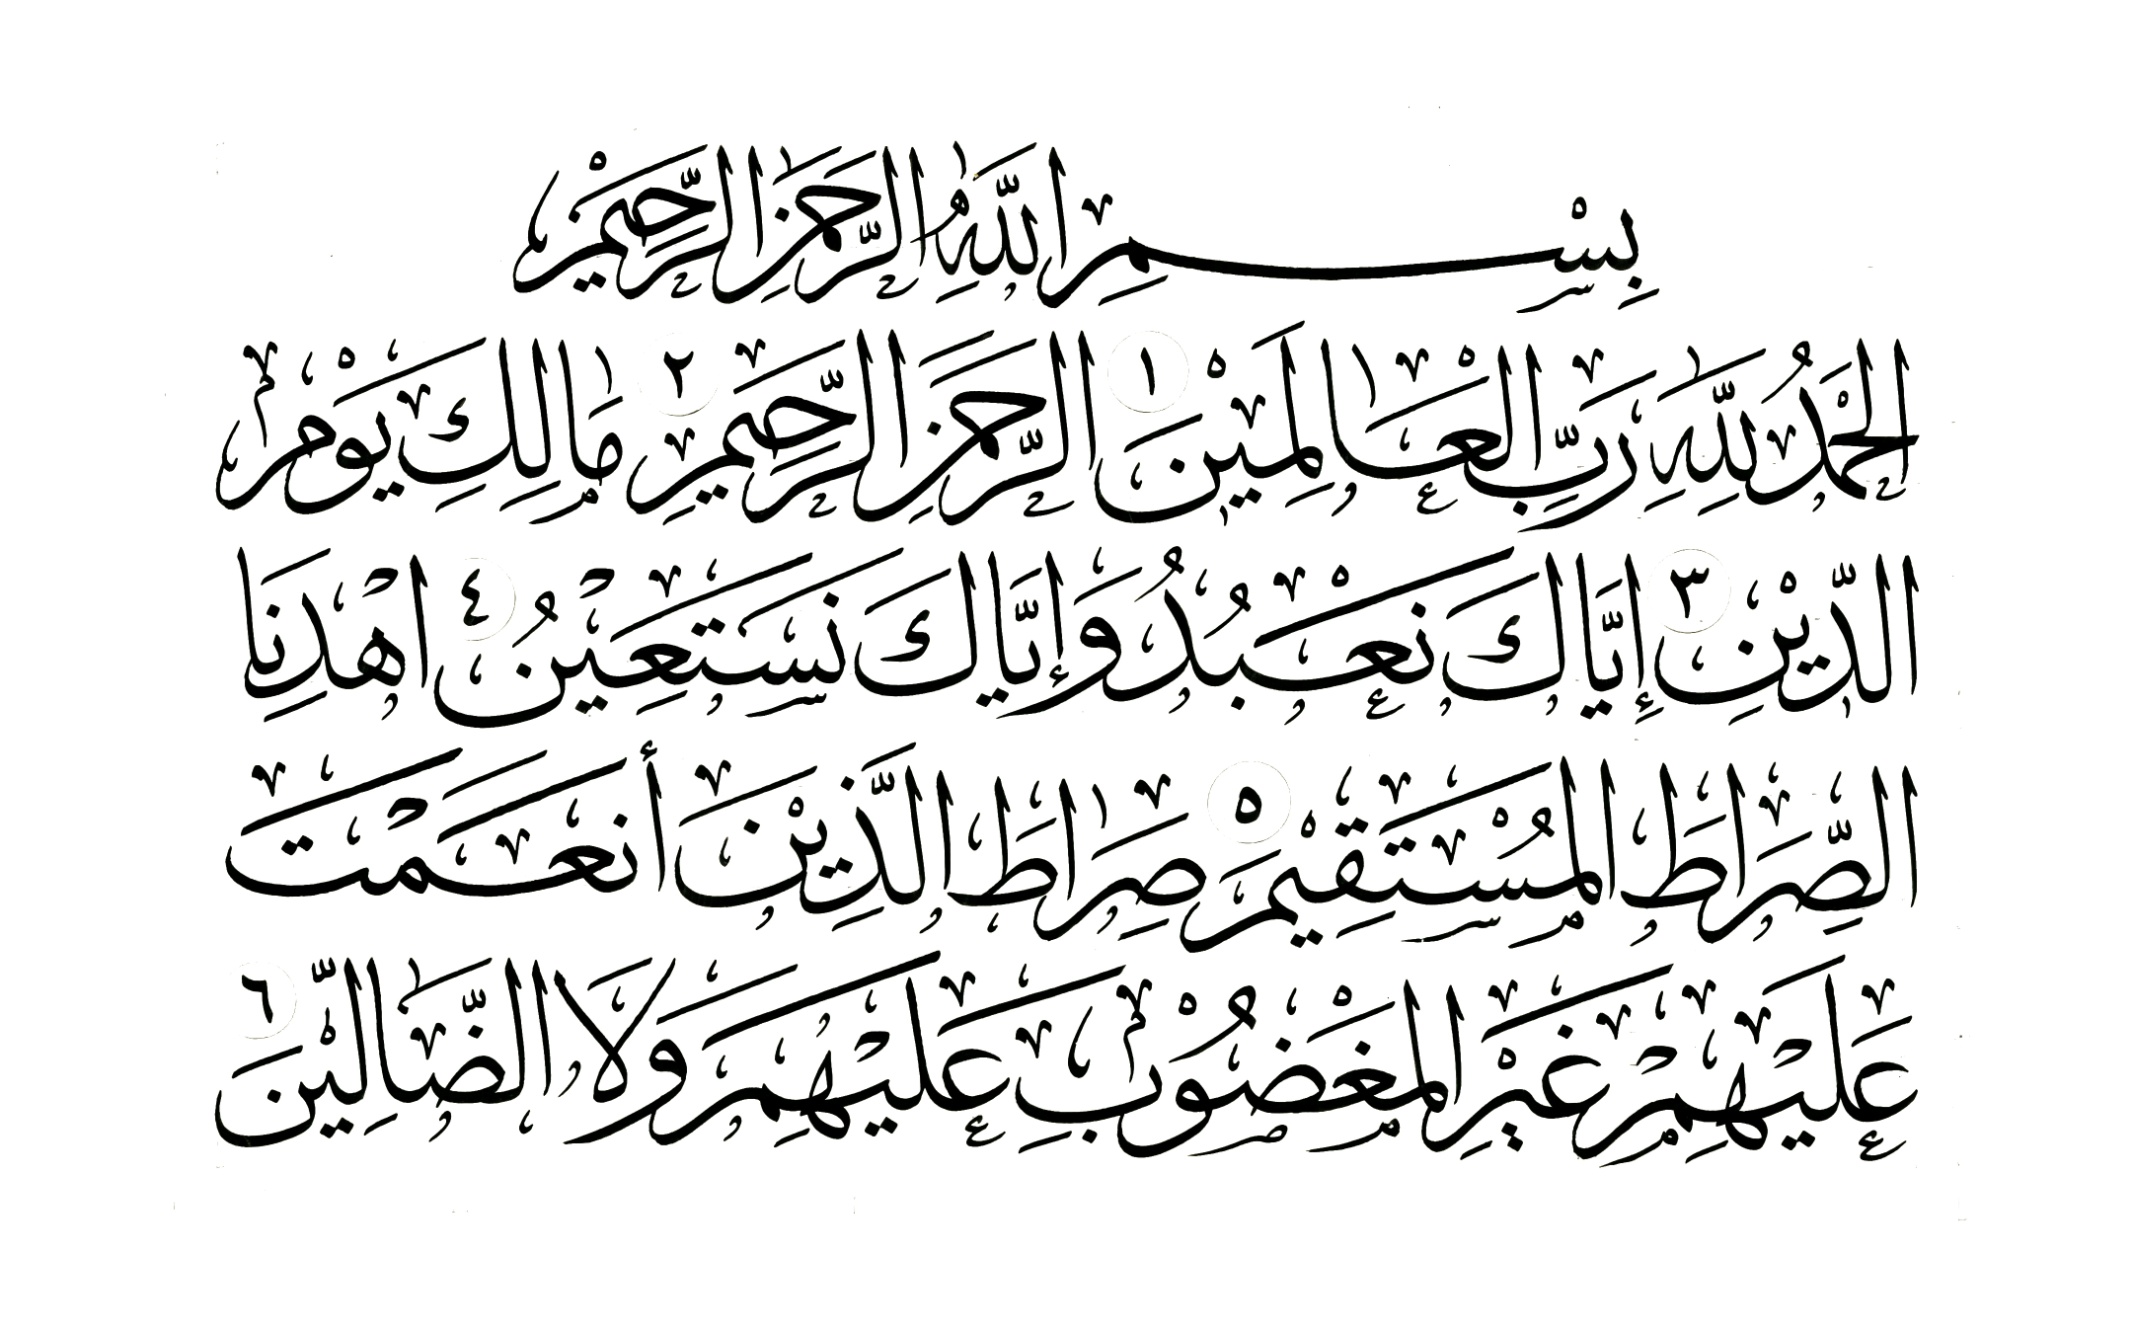 Surah Fatihah Its Revelation And Composition Islaam Net By Radiant Drops